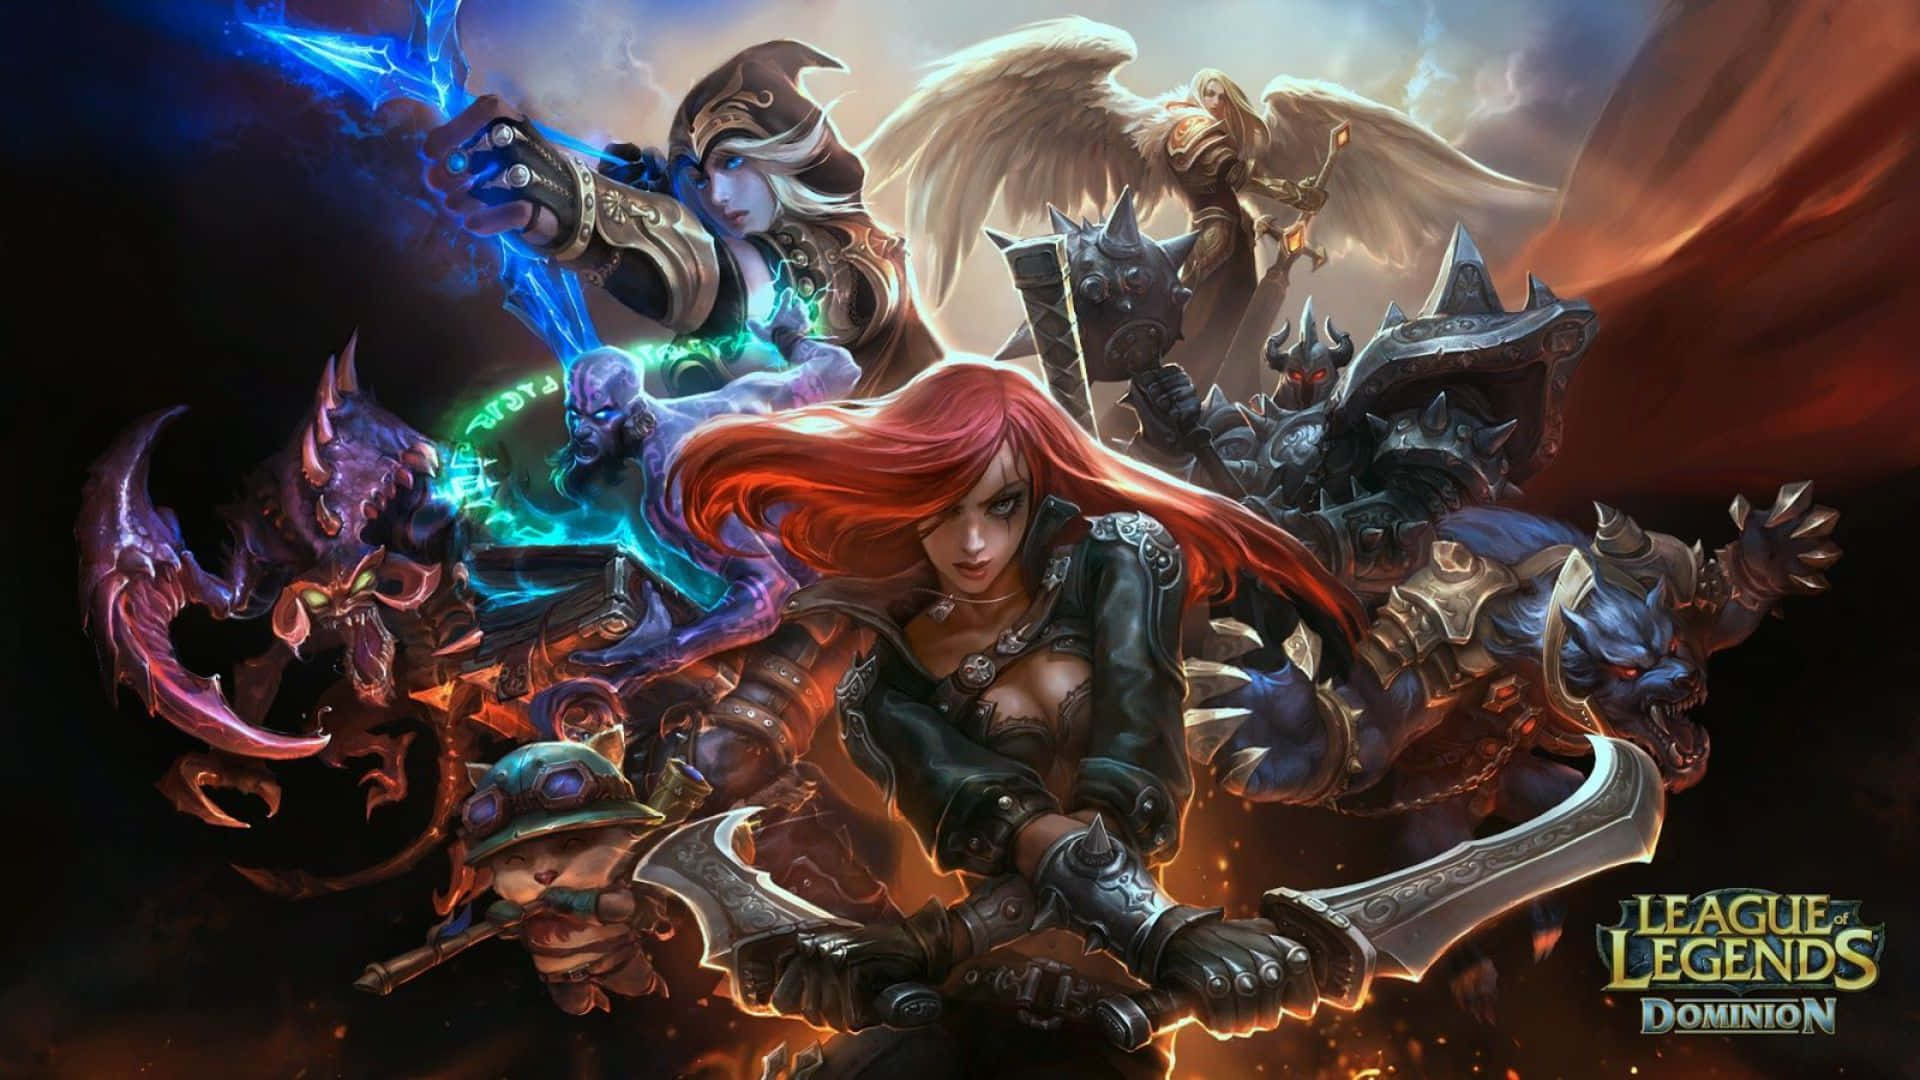 "League of Legends - a competitive, action-packed multiplayer game"